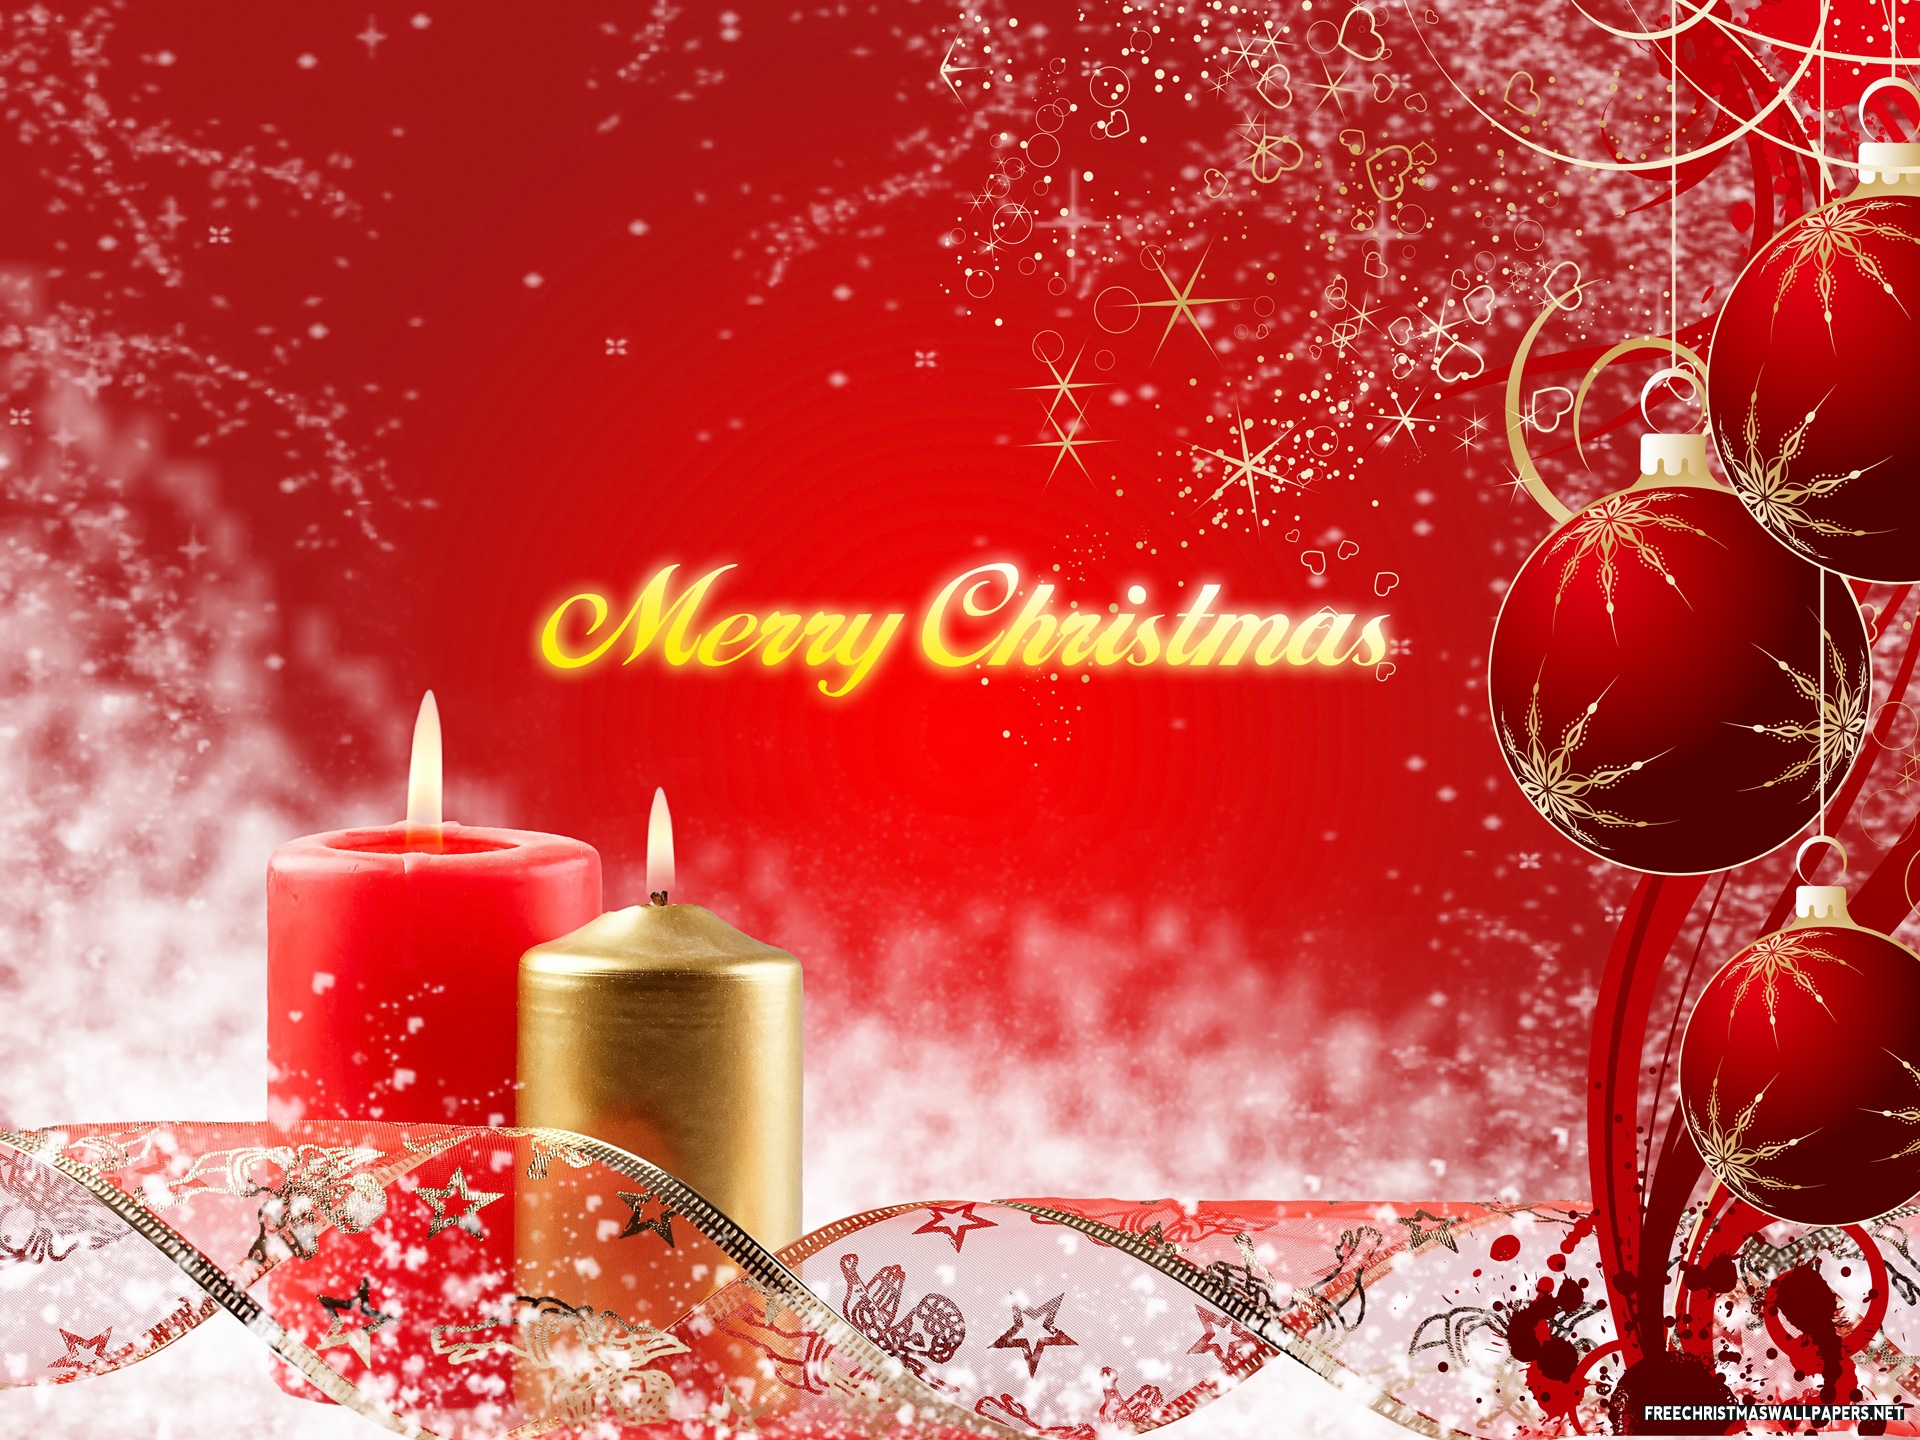 Merry Christmas Candles And Red Theme Wallpaper